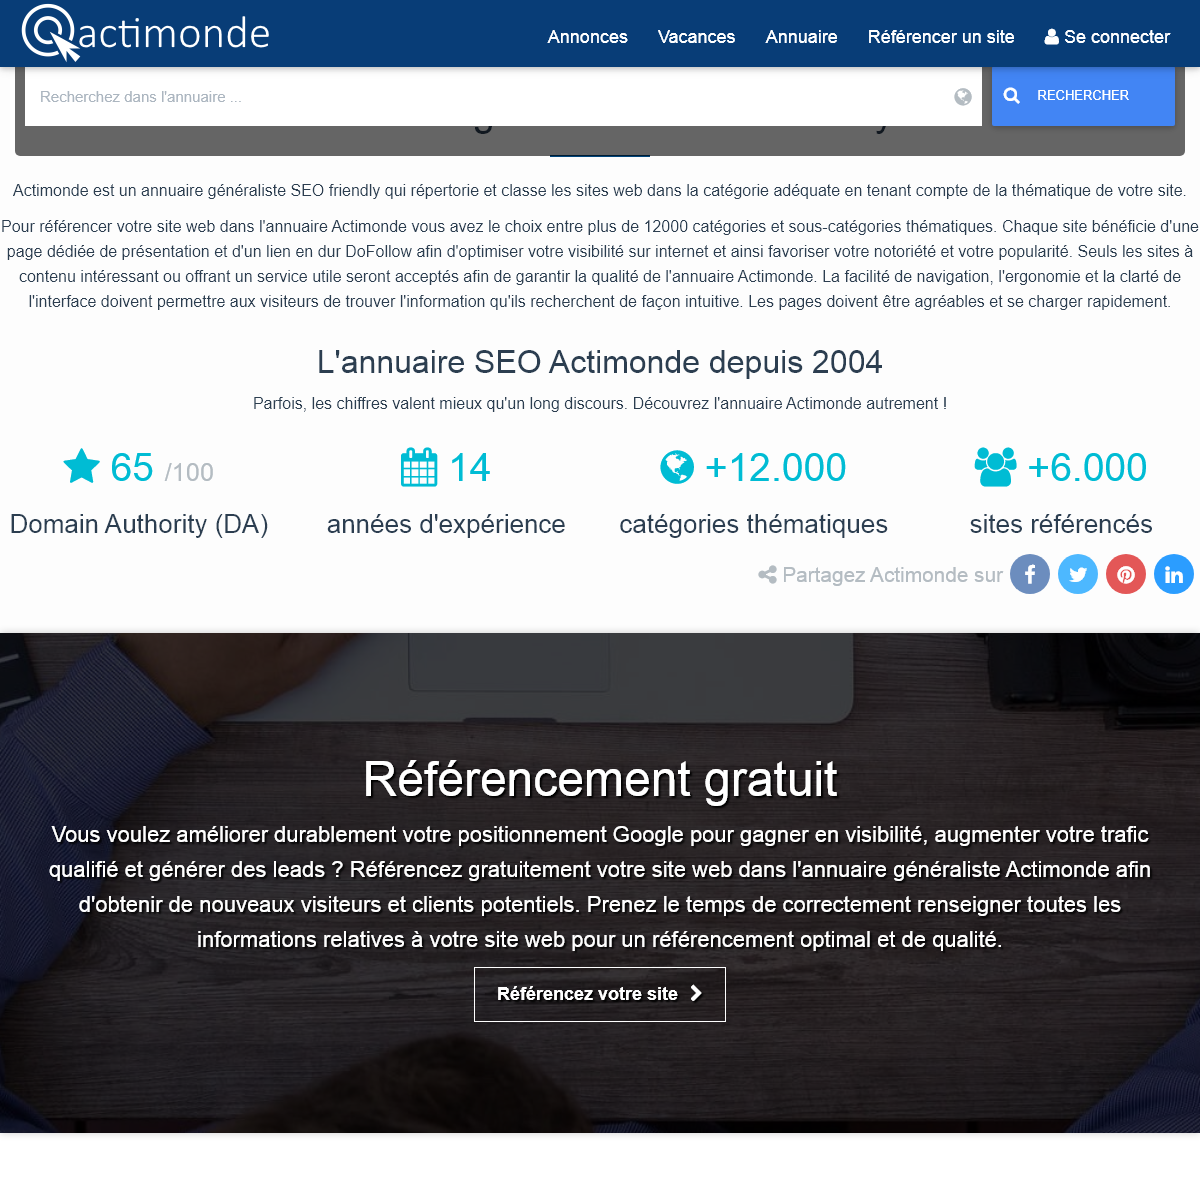 A complete backup of actimonde.com